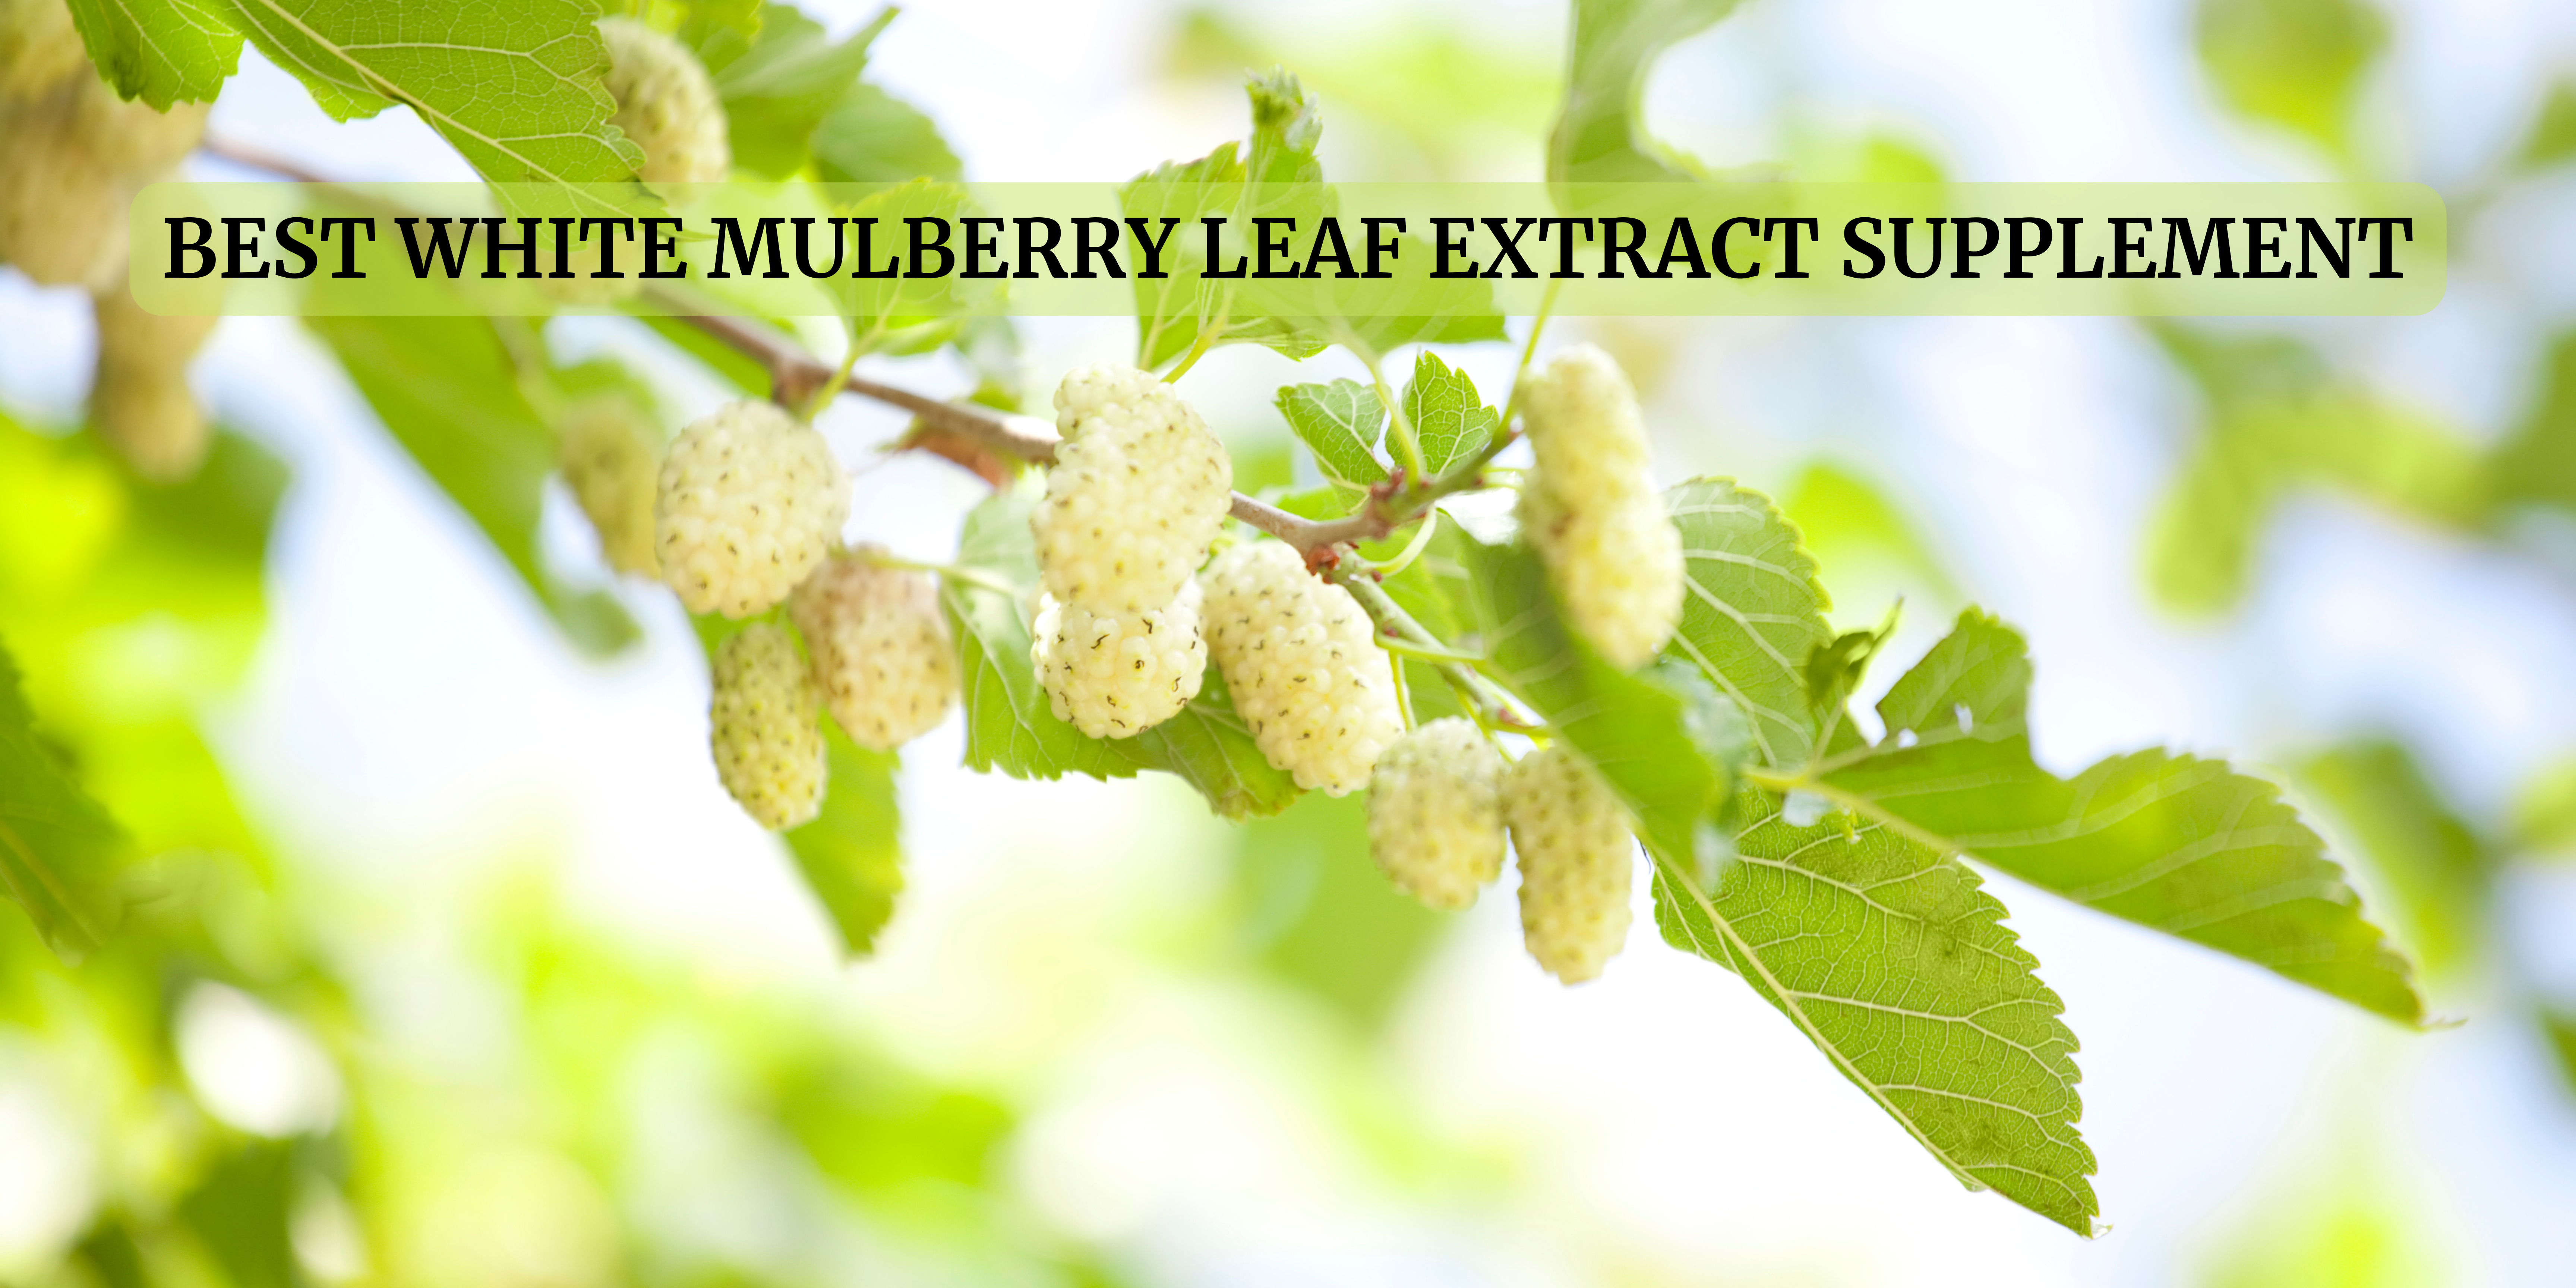 white mulberry leaf extract supplement in Singapore